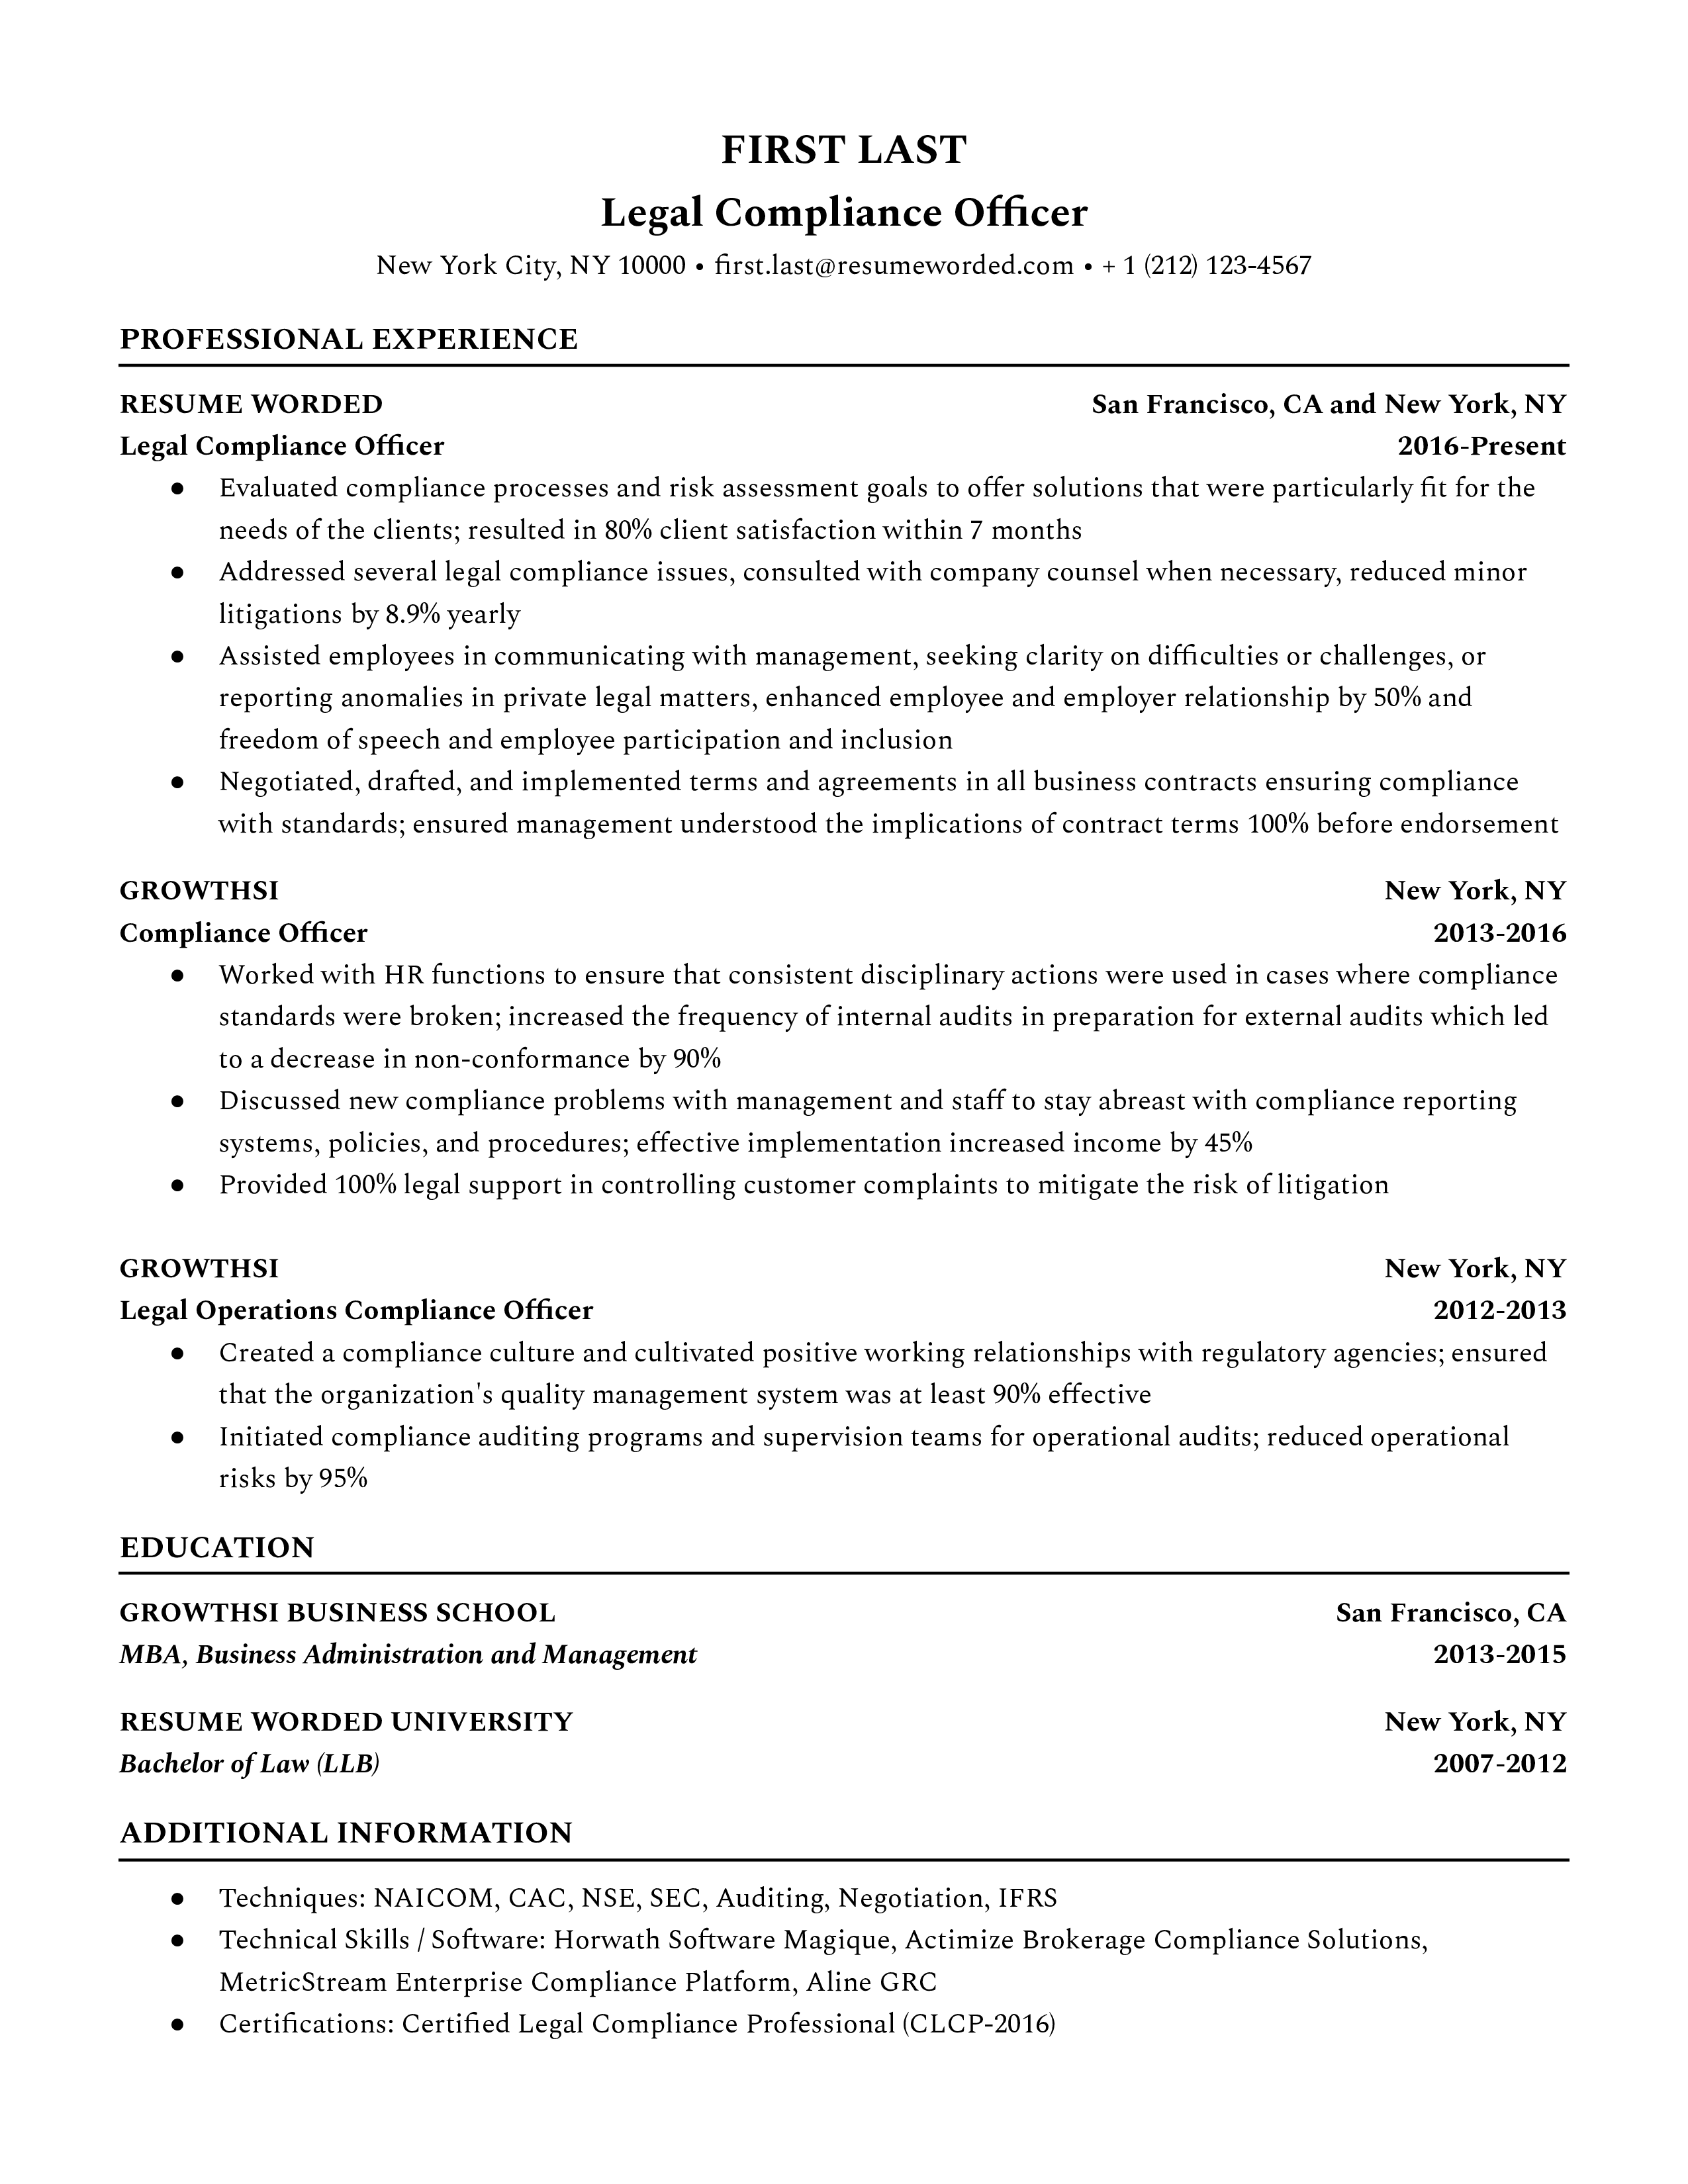 Legal compliance officer resume example